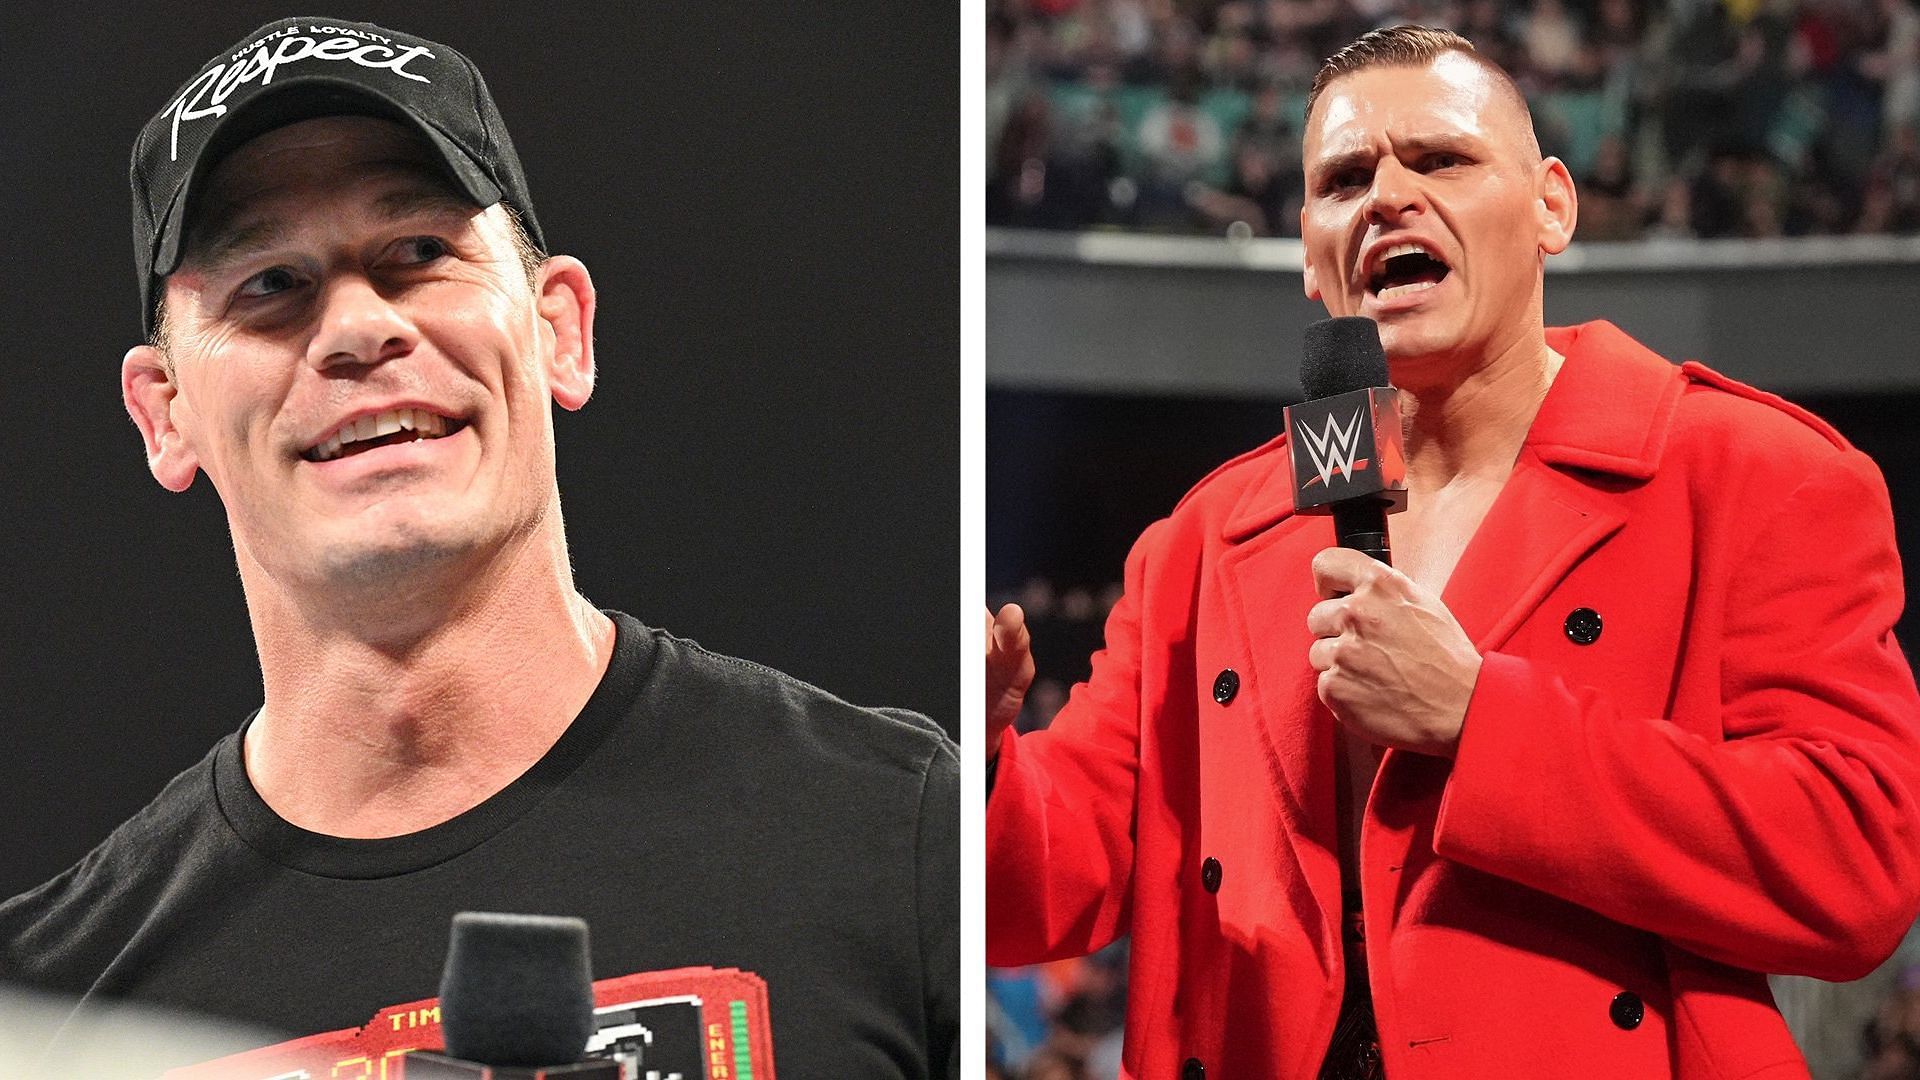 John Cena could clash with Gunther at the WWE Superstar Spectacle event